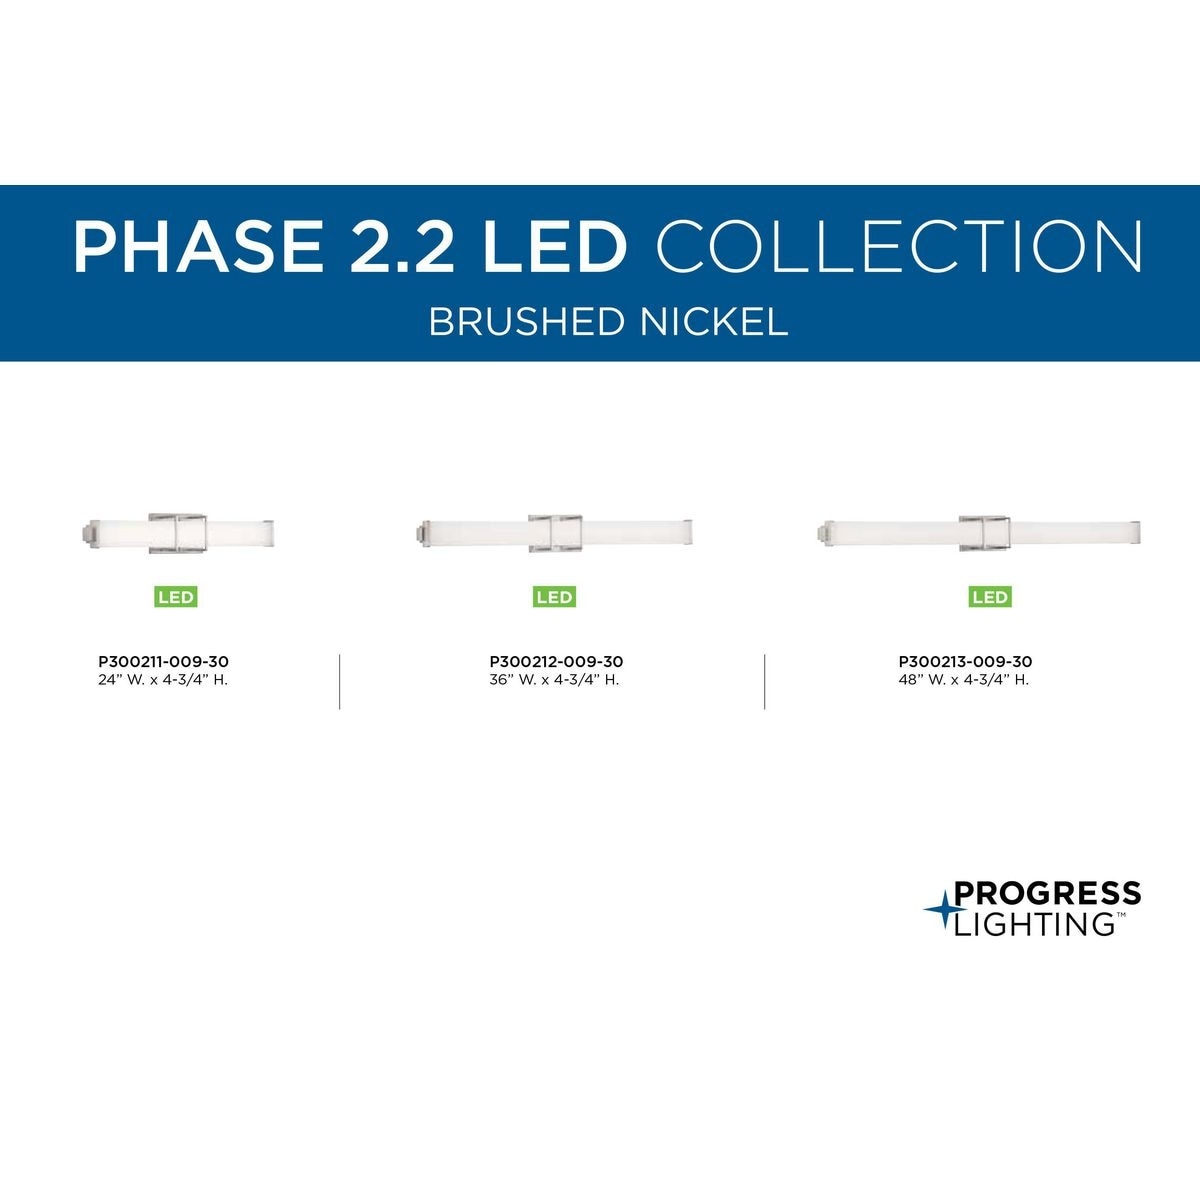 Phase 2.2 LED Collection 24